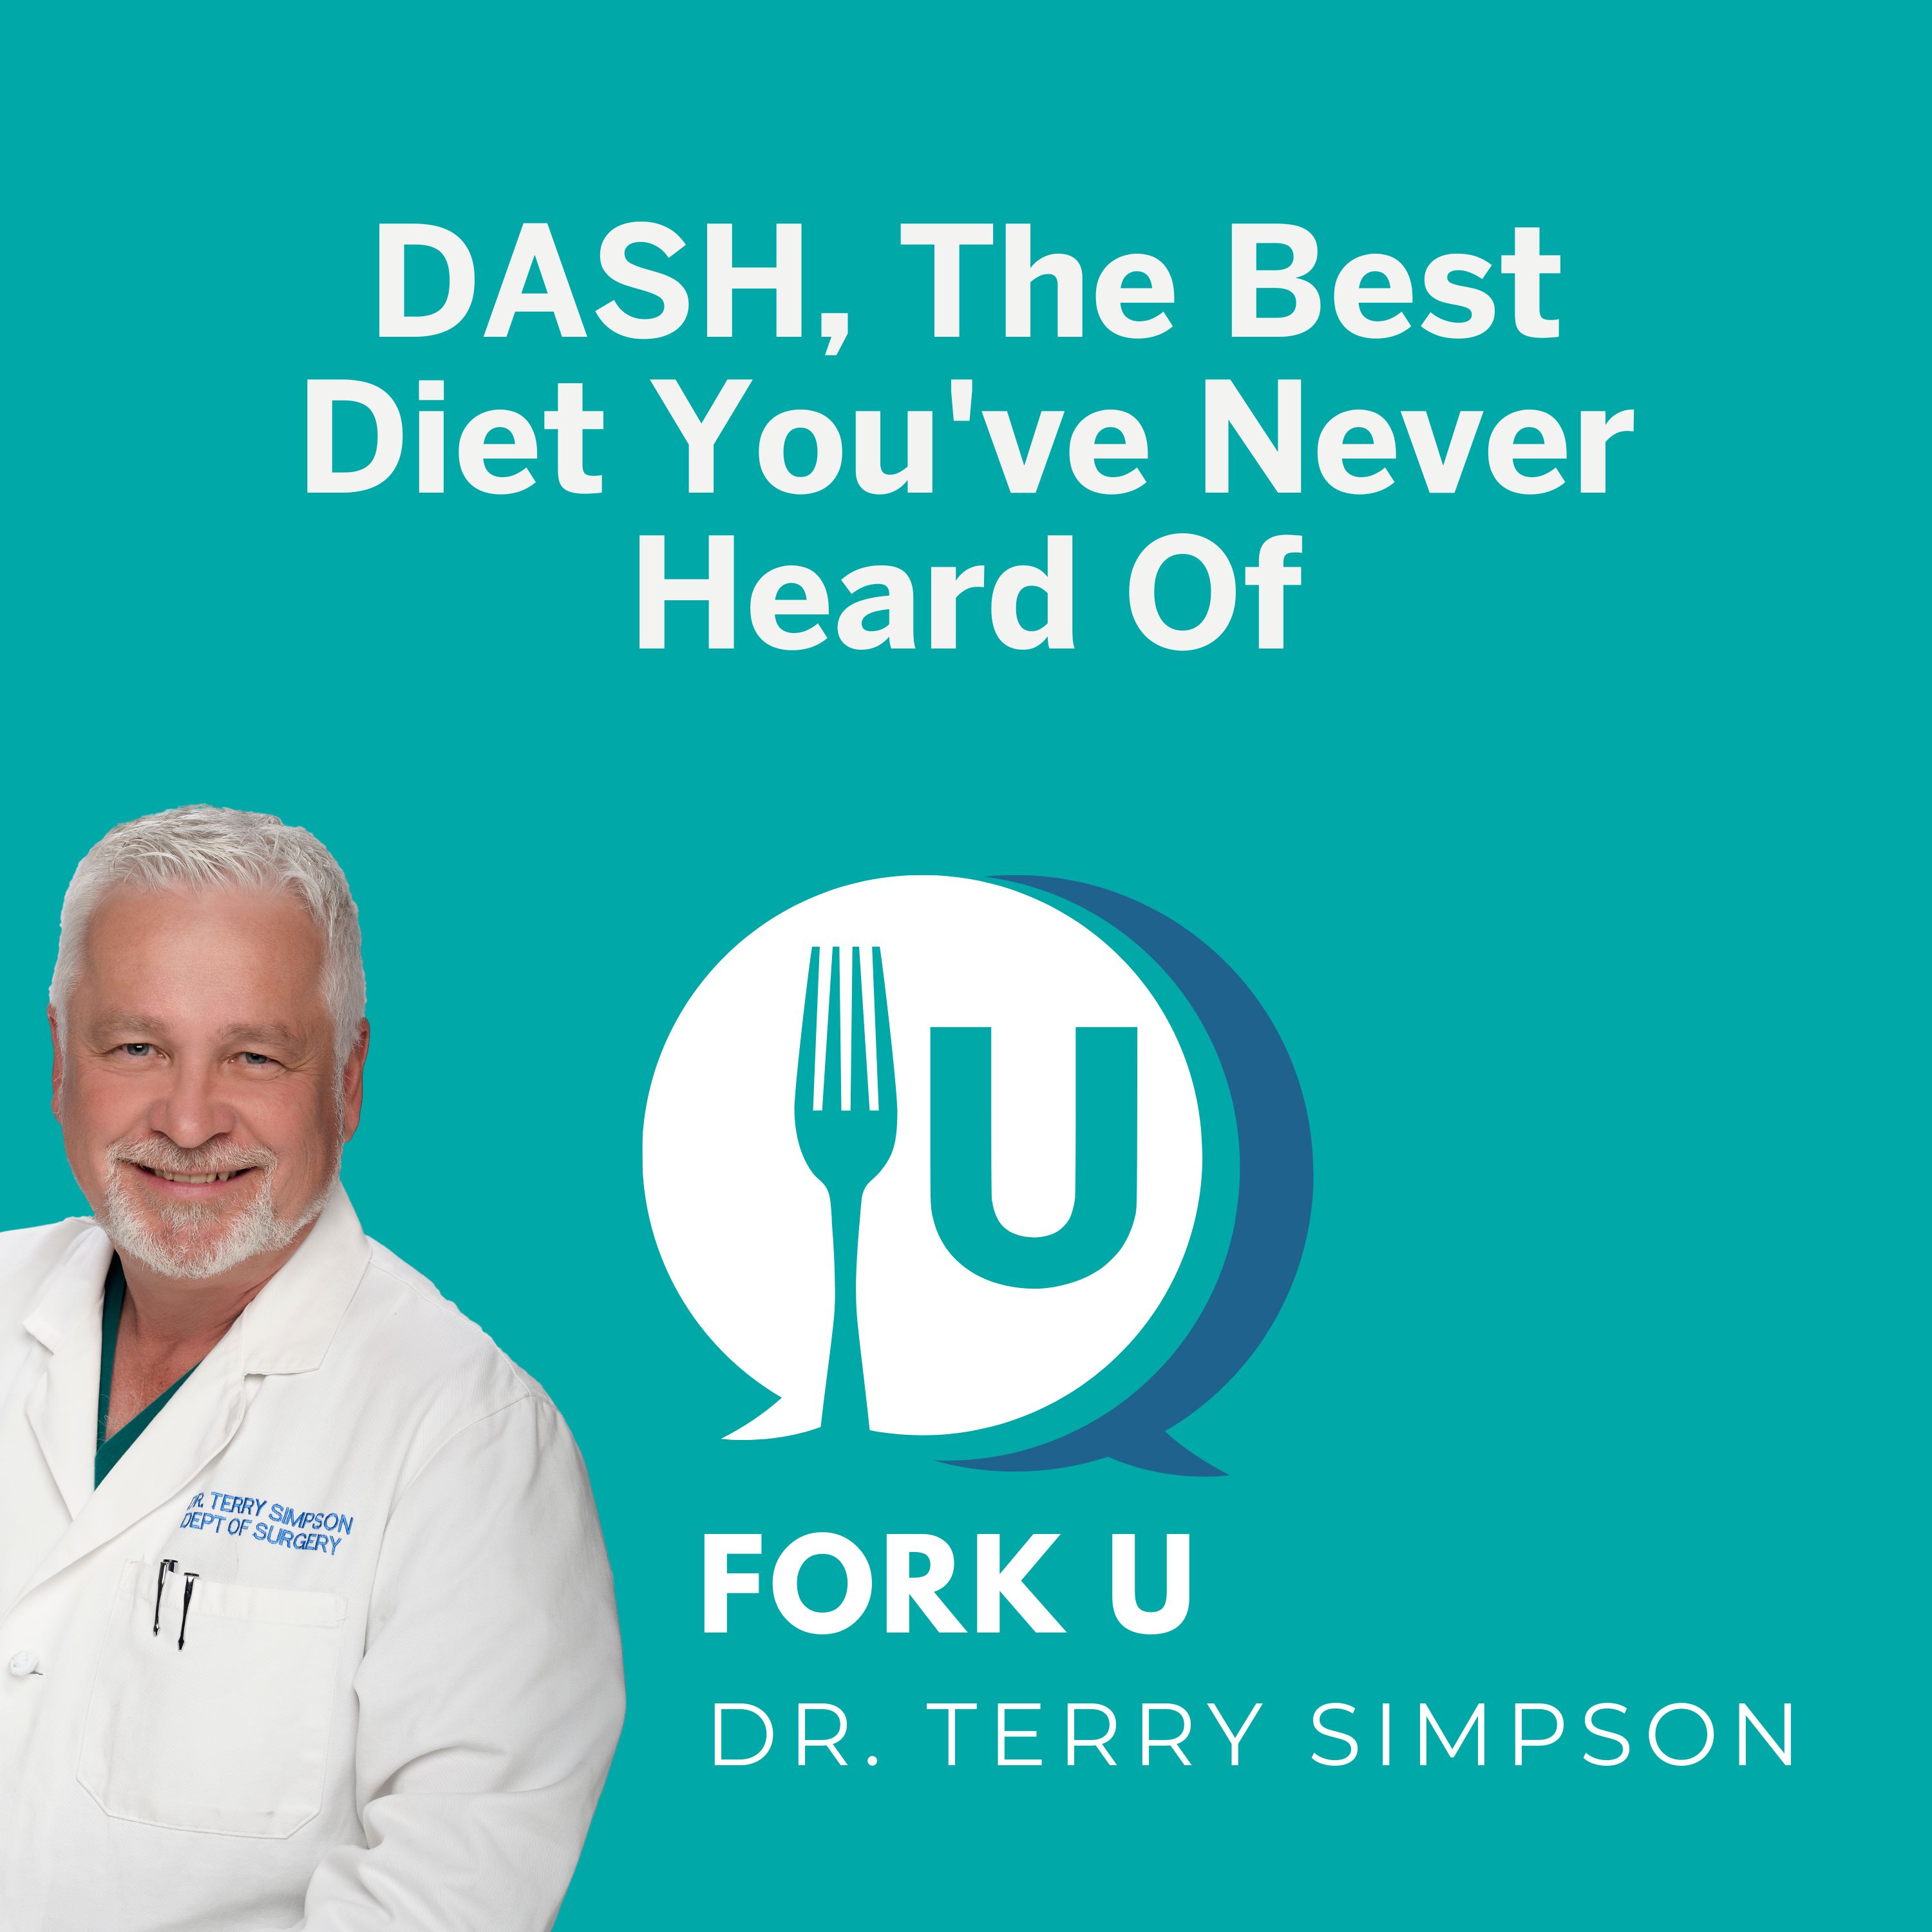 DASH, The Best Diet You've Never Heard Of